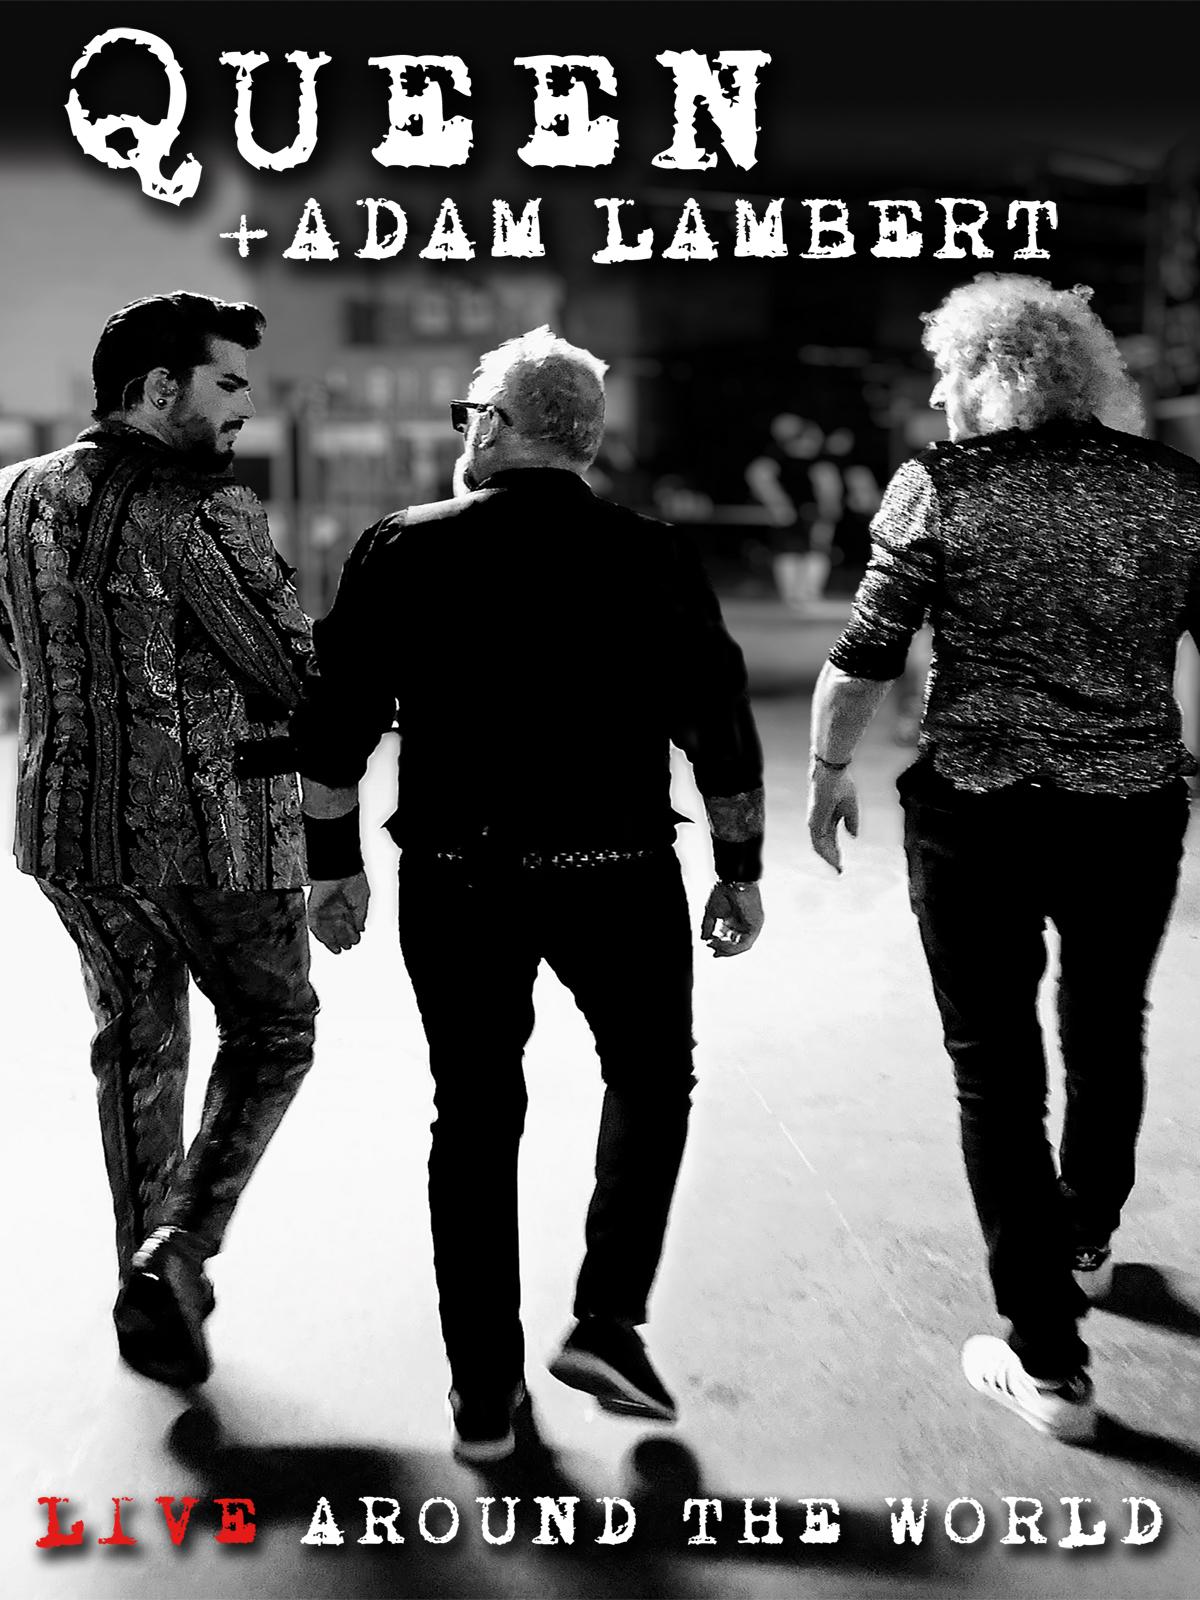 Queen + Adam Lambert’s ‘Live Around The World’ Concert Film Available to download or rent now.